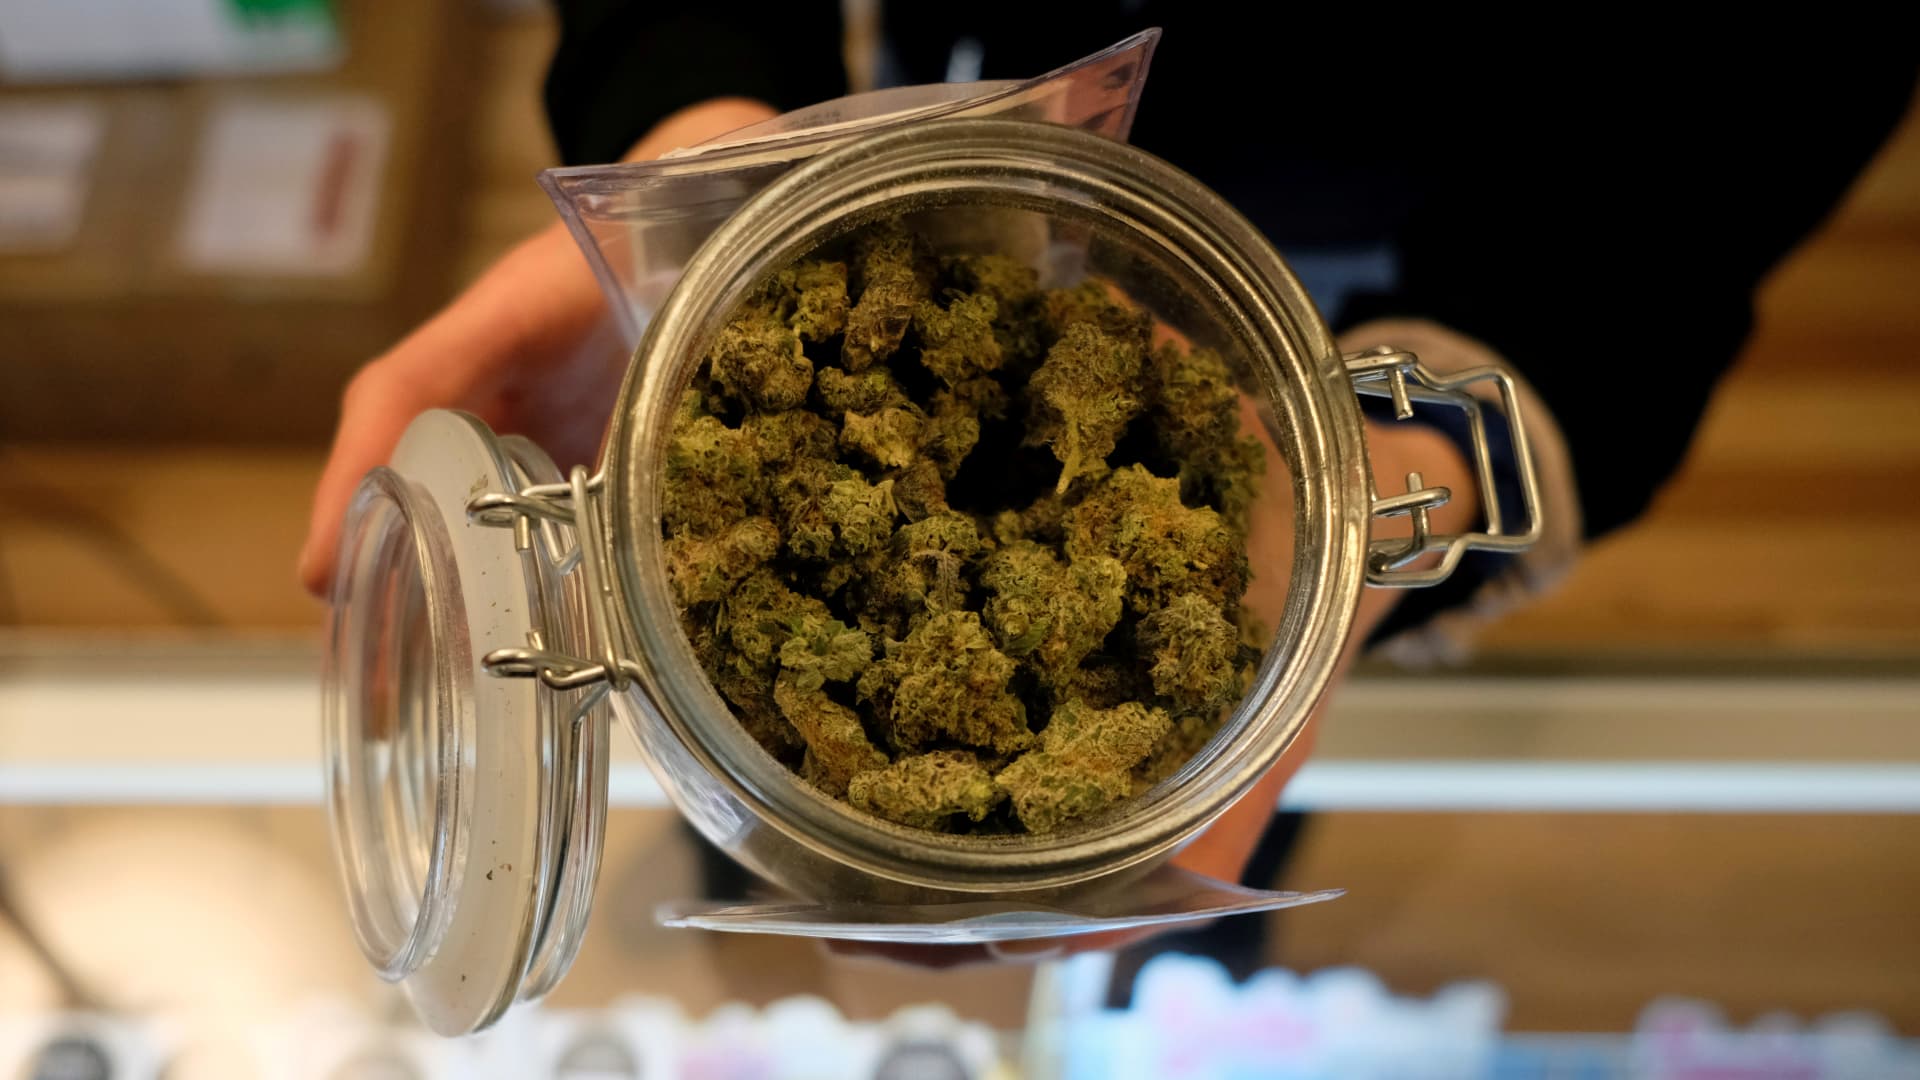 An employee holds a jar of marijuana on sale after it became legal in the state to sell recreational marijuana to customers over 21 years old in Ann Arbor, Michigan. Illinois begins the legal sale of marijuana on Jan 1, 2020.